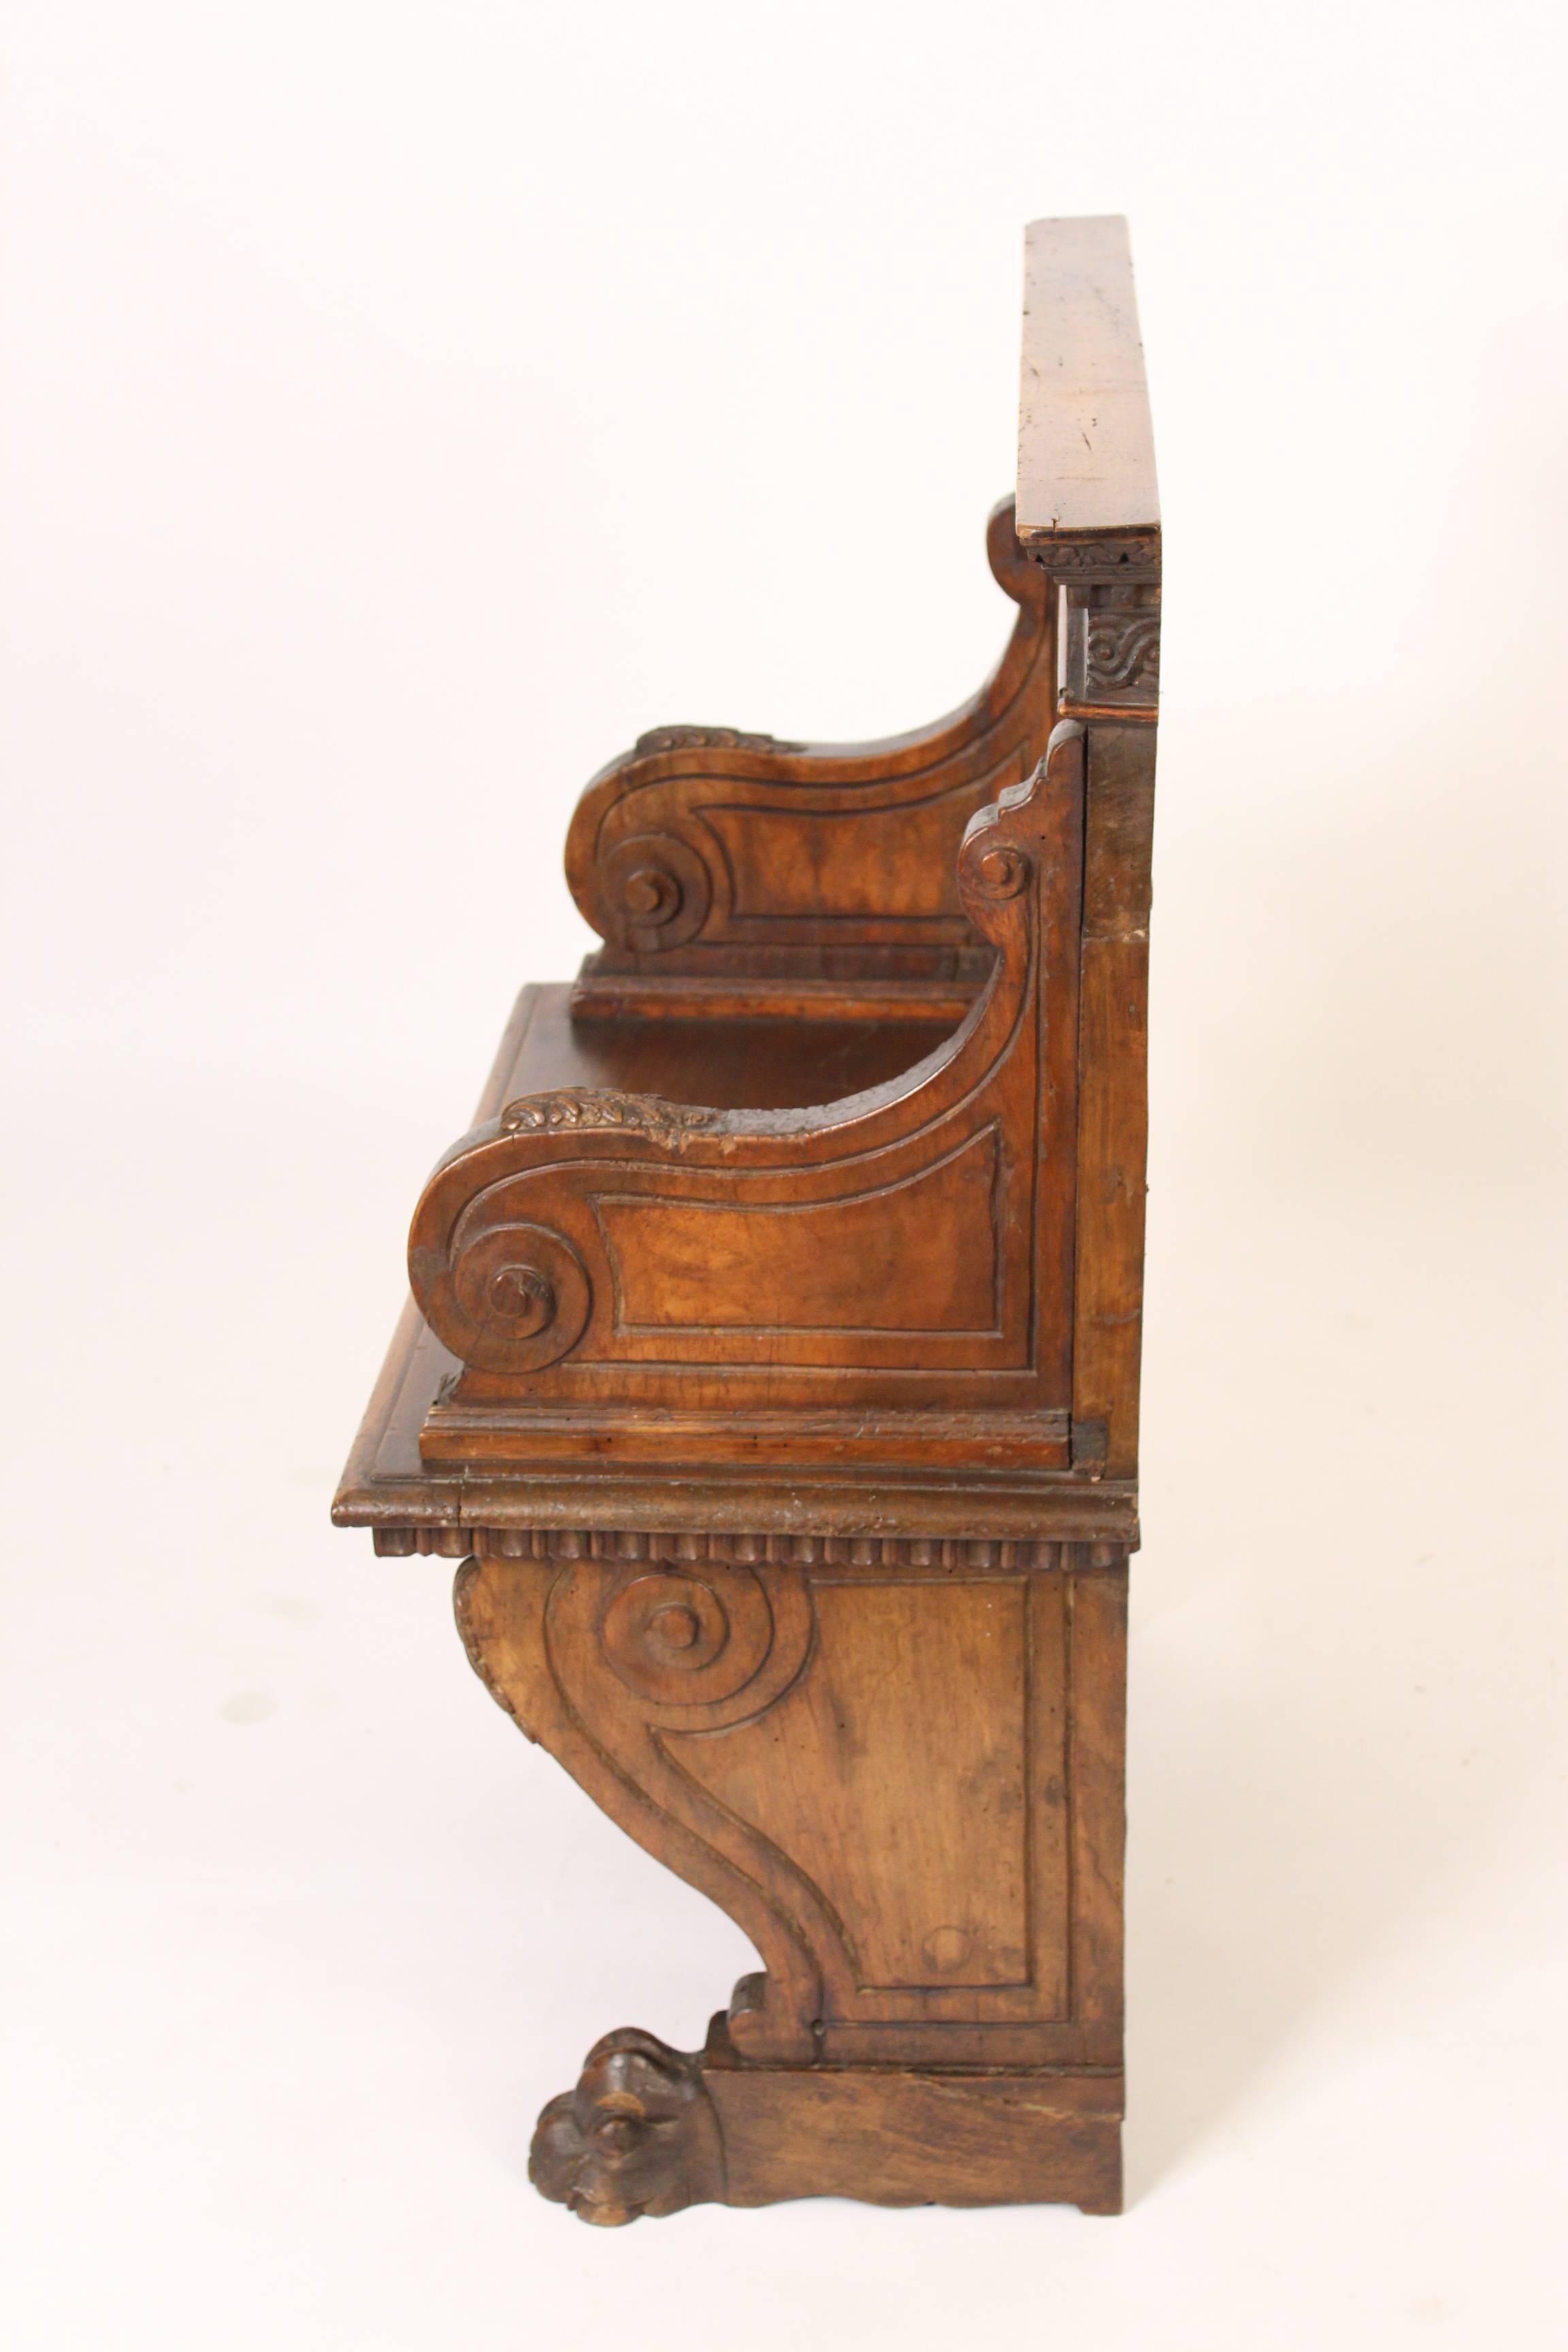 Baroque style walnut bench, 19th century. The back having dental molding
and carved guilloche design with Romanesque arches, voluted arms and paw feet. This bench has excellent original patina.